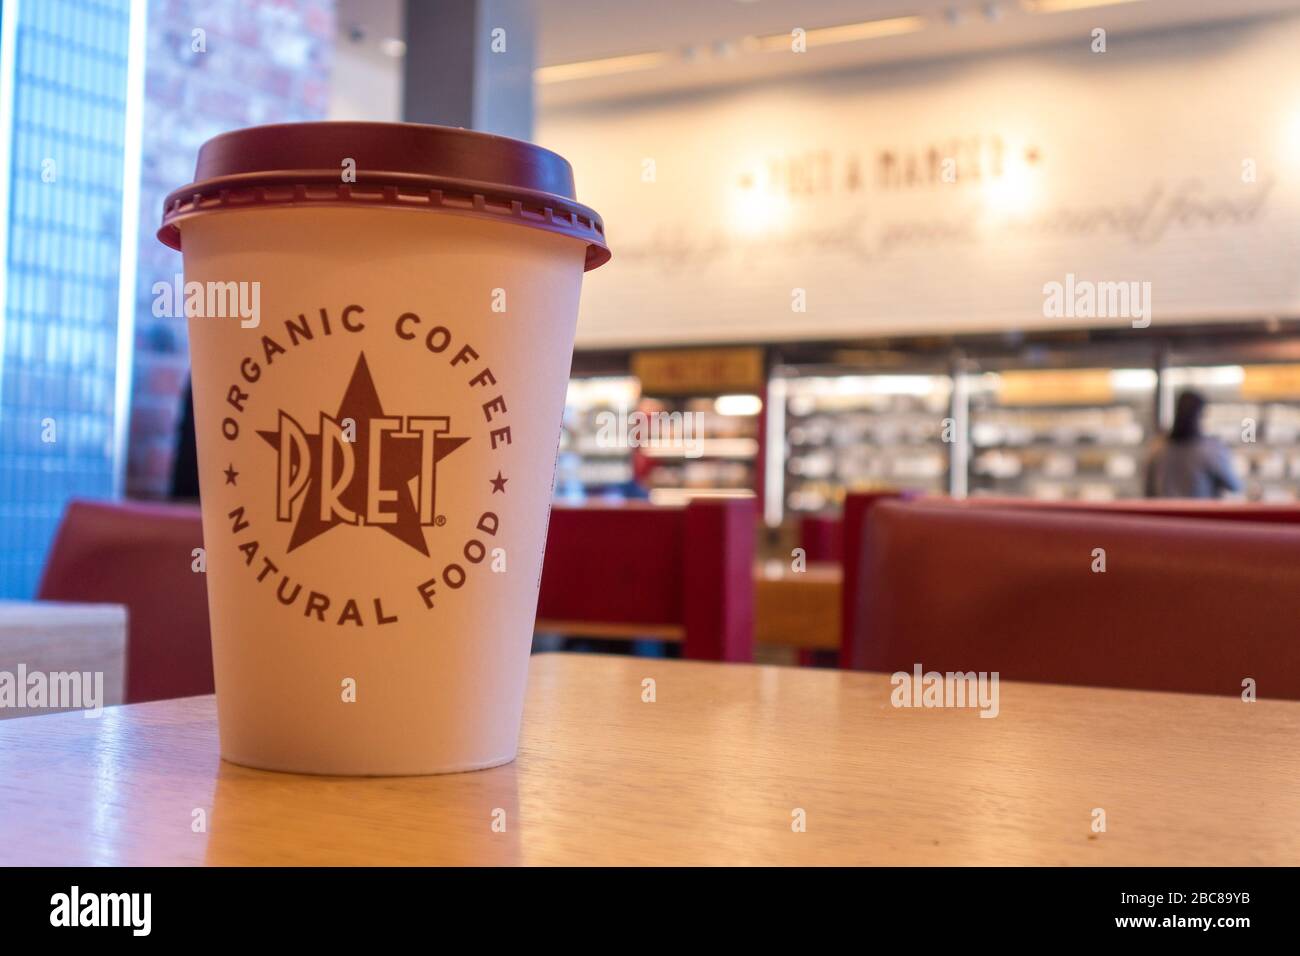 Pret A Manger Store, Brtish Chain of Café / Food Take Away Stores - Exterieur Logo / Signage - London Stockfoto